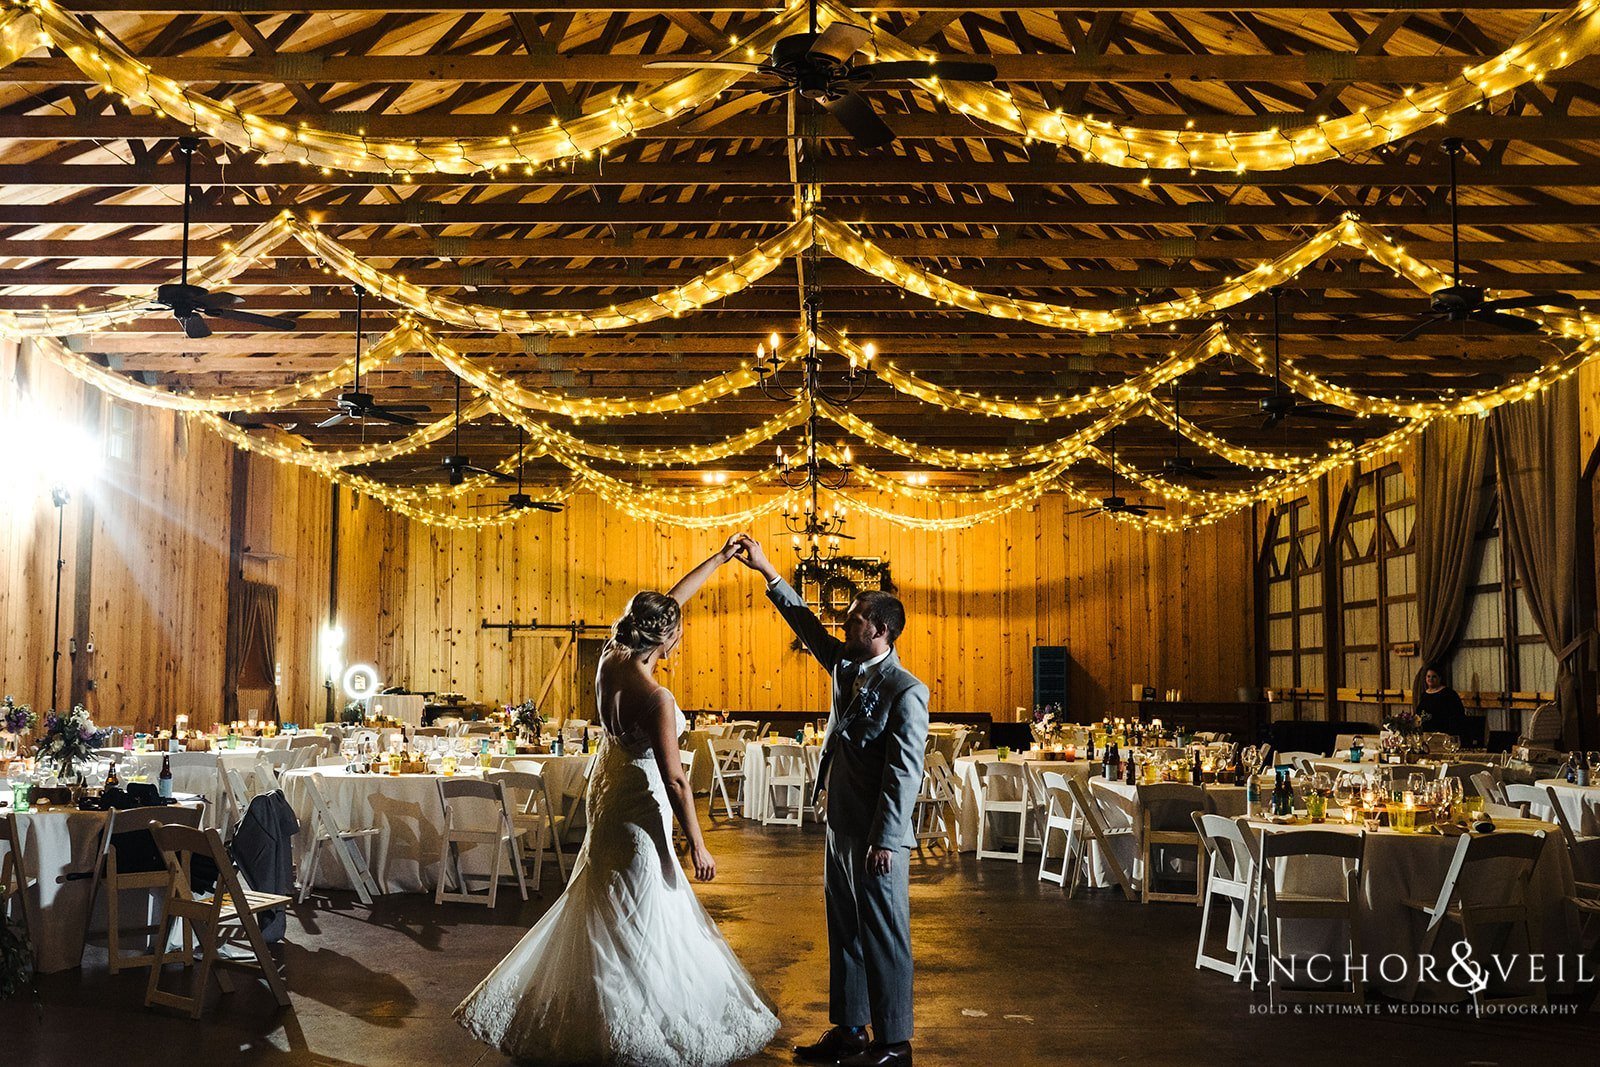 Dancing under for the lights for the Bride and Groom at The Farm at Brusharbor Wedding